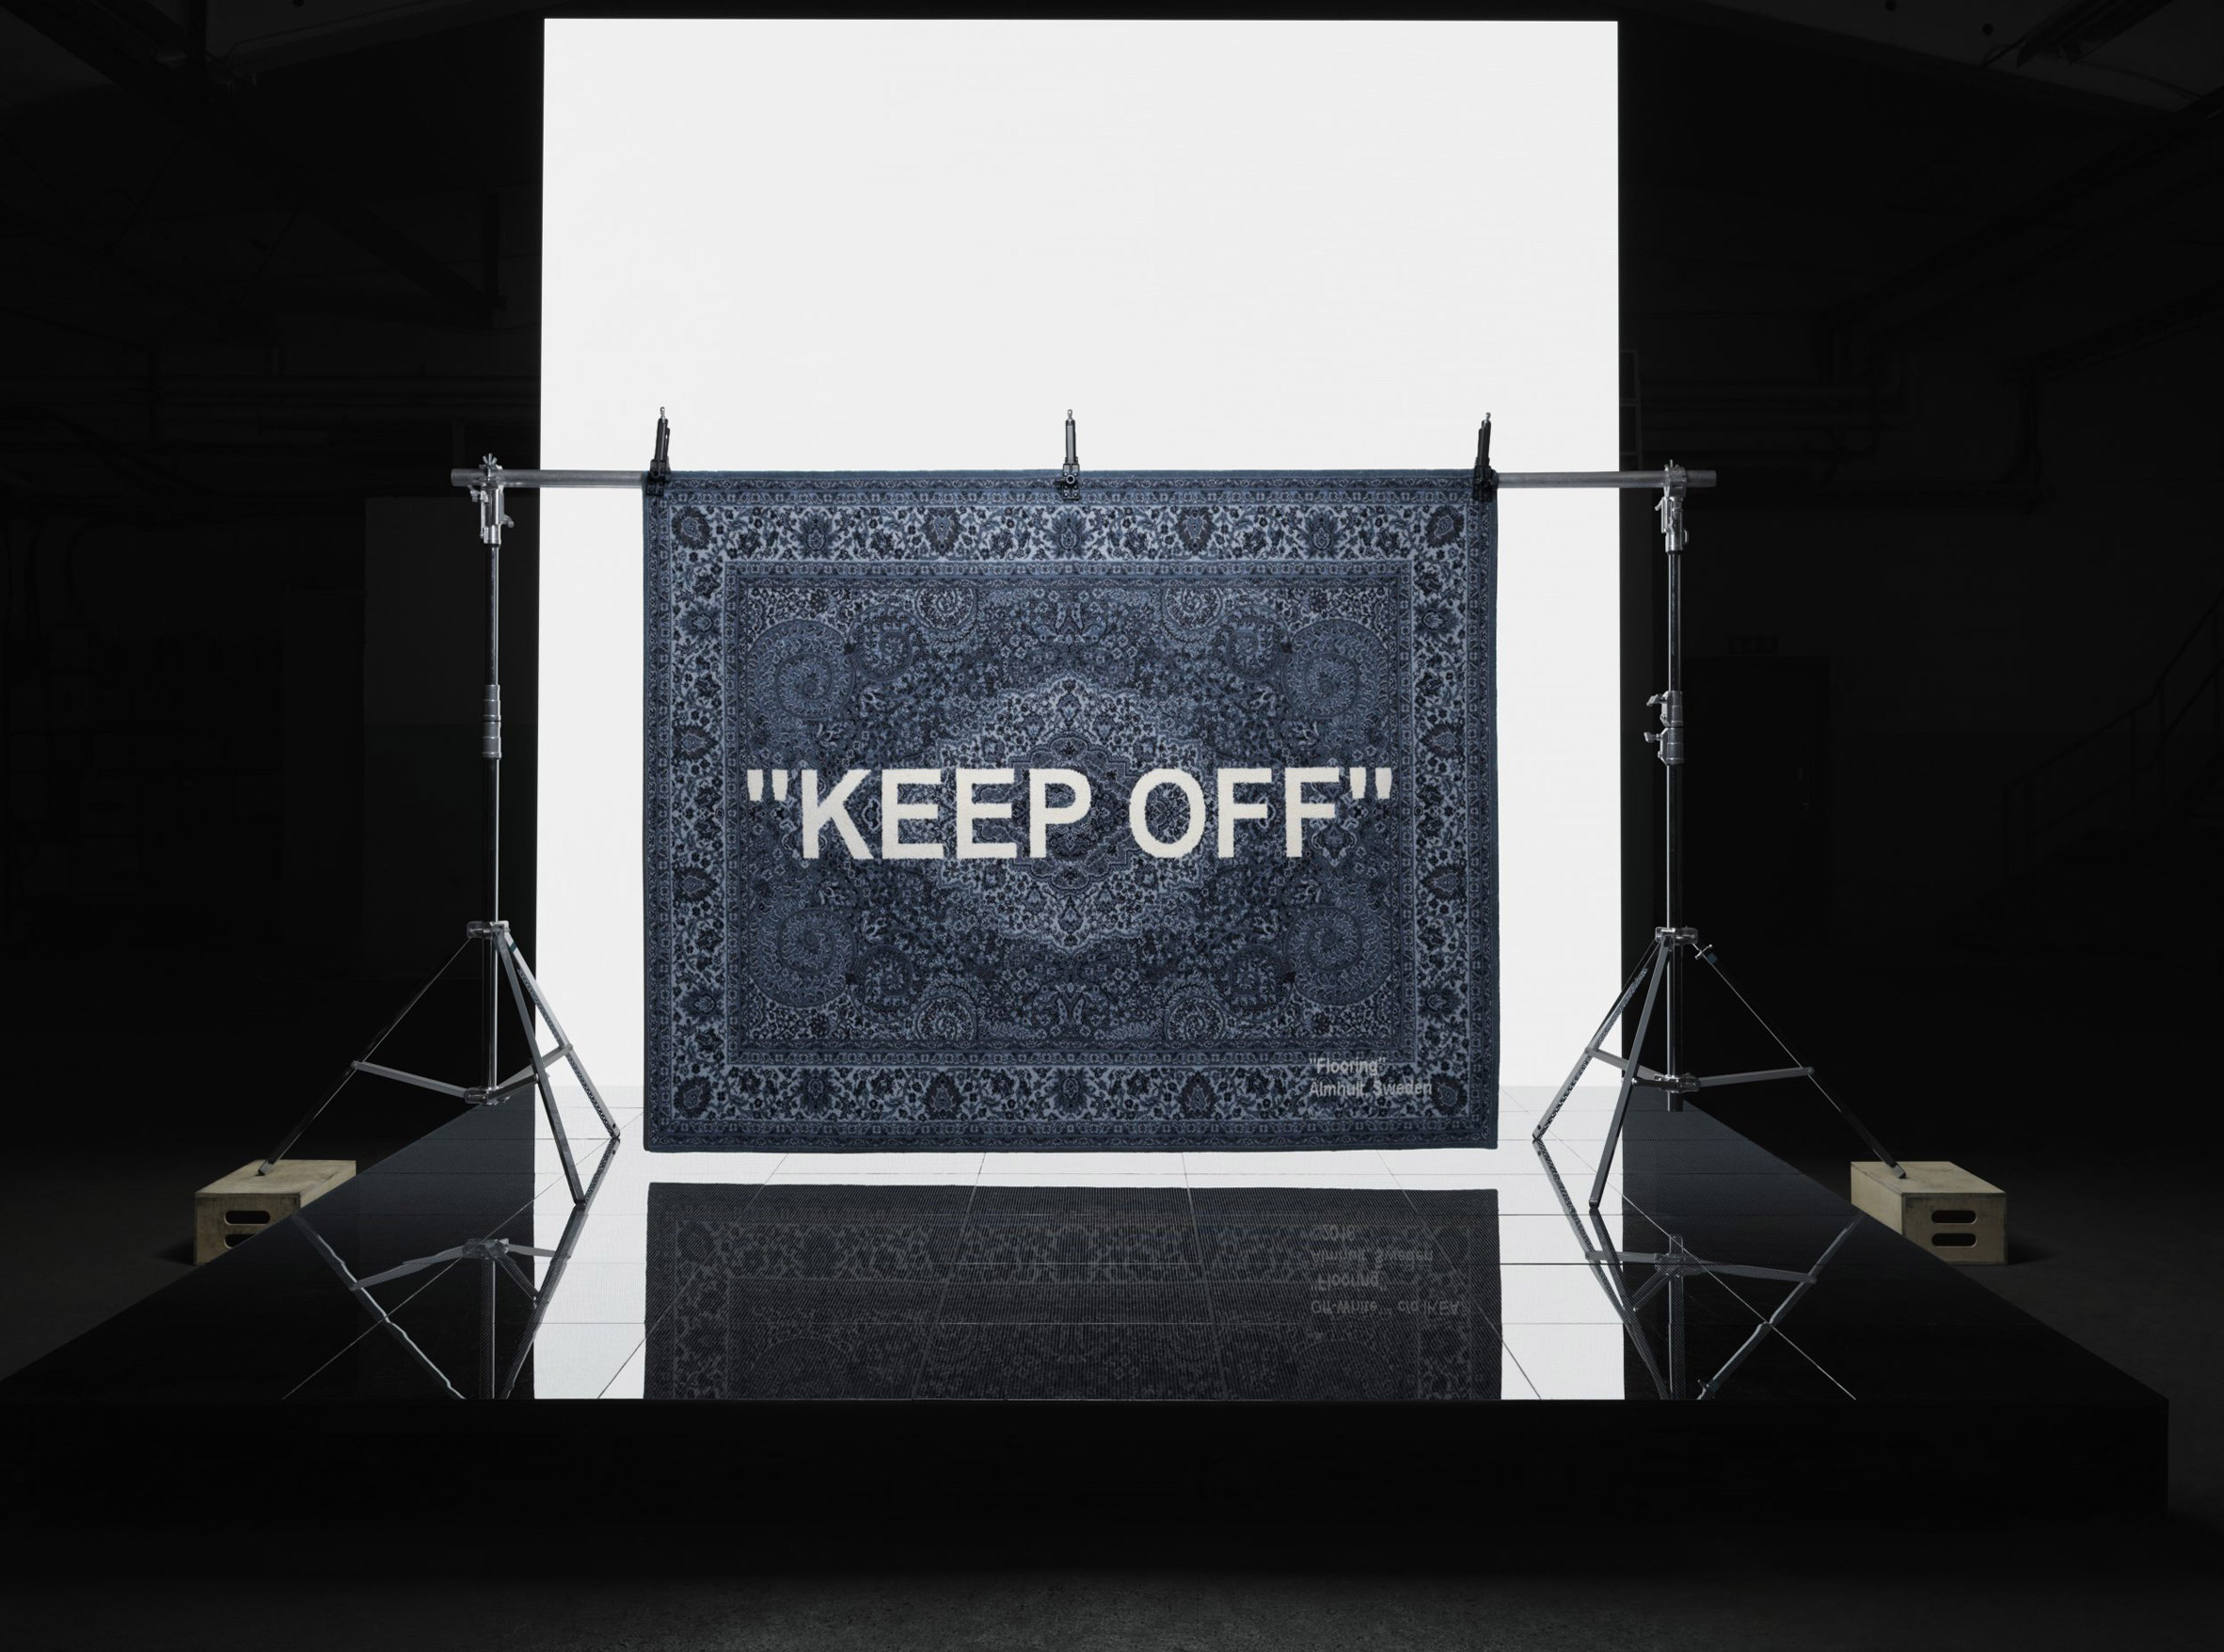 Virgil Abloh's IKEA Rugs Are Going for Thousands on  - Off-White IKEA  Rug